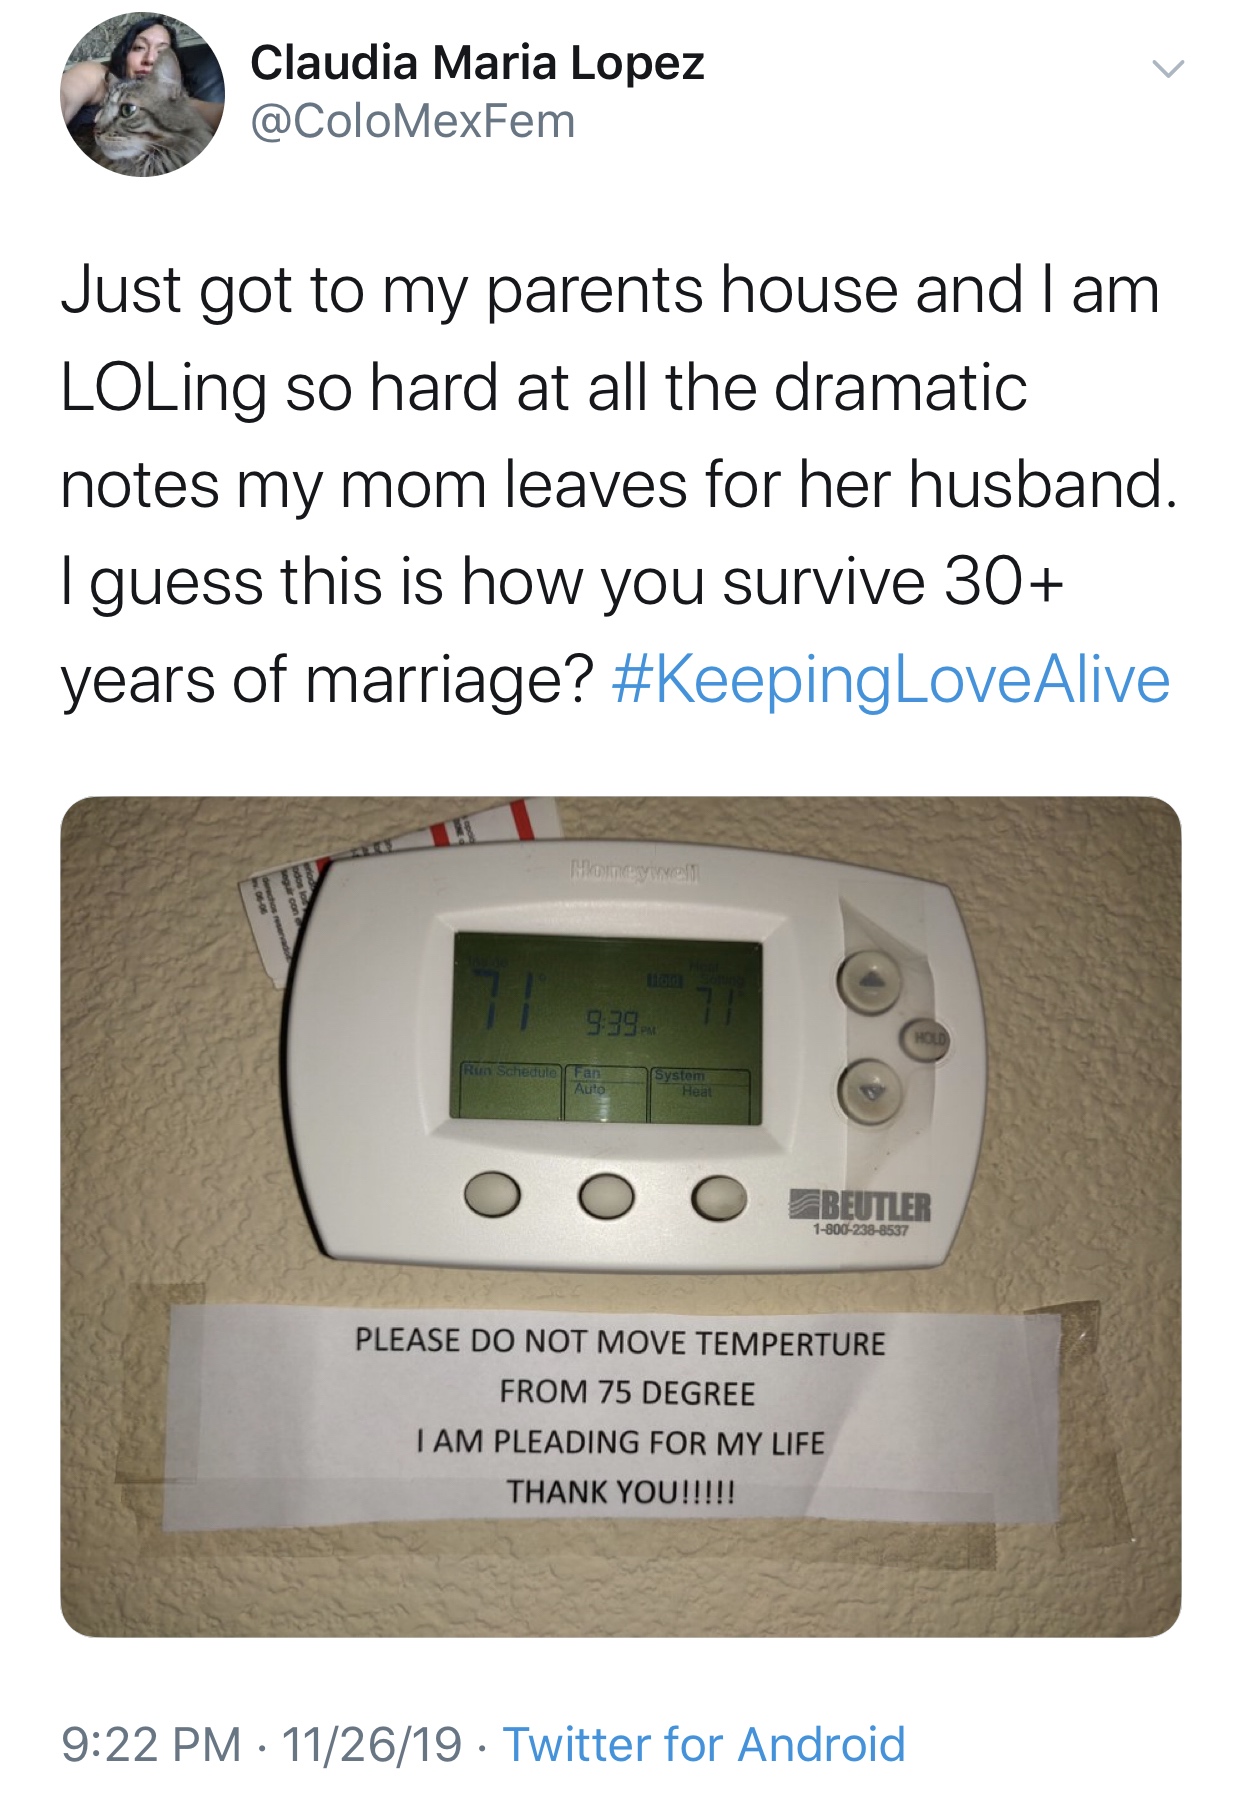 electronics - Claudia Maria Lopez Just got to my parents house and I am LOLing so hard at all the dramatic notes my mom leaves for her husband. I guess this is how you survive 30 years of marriage? O O O Brutle Please Do Not Move Temperture From 75 Degree